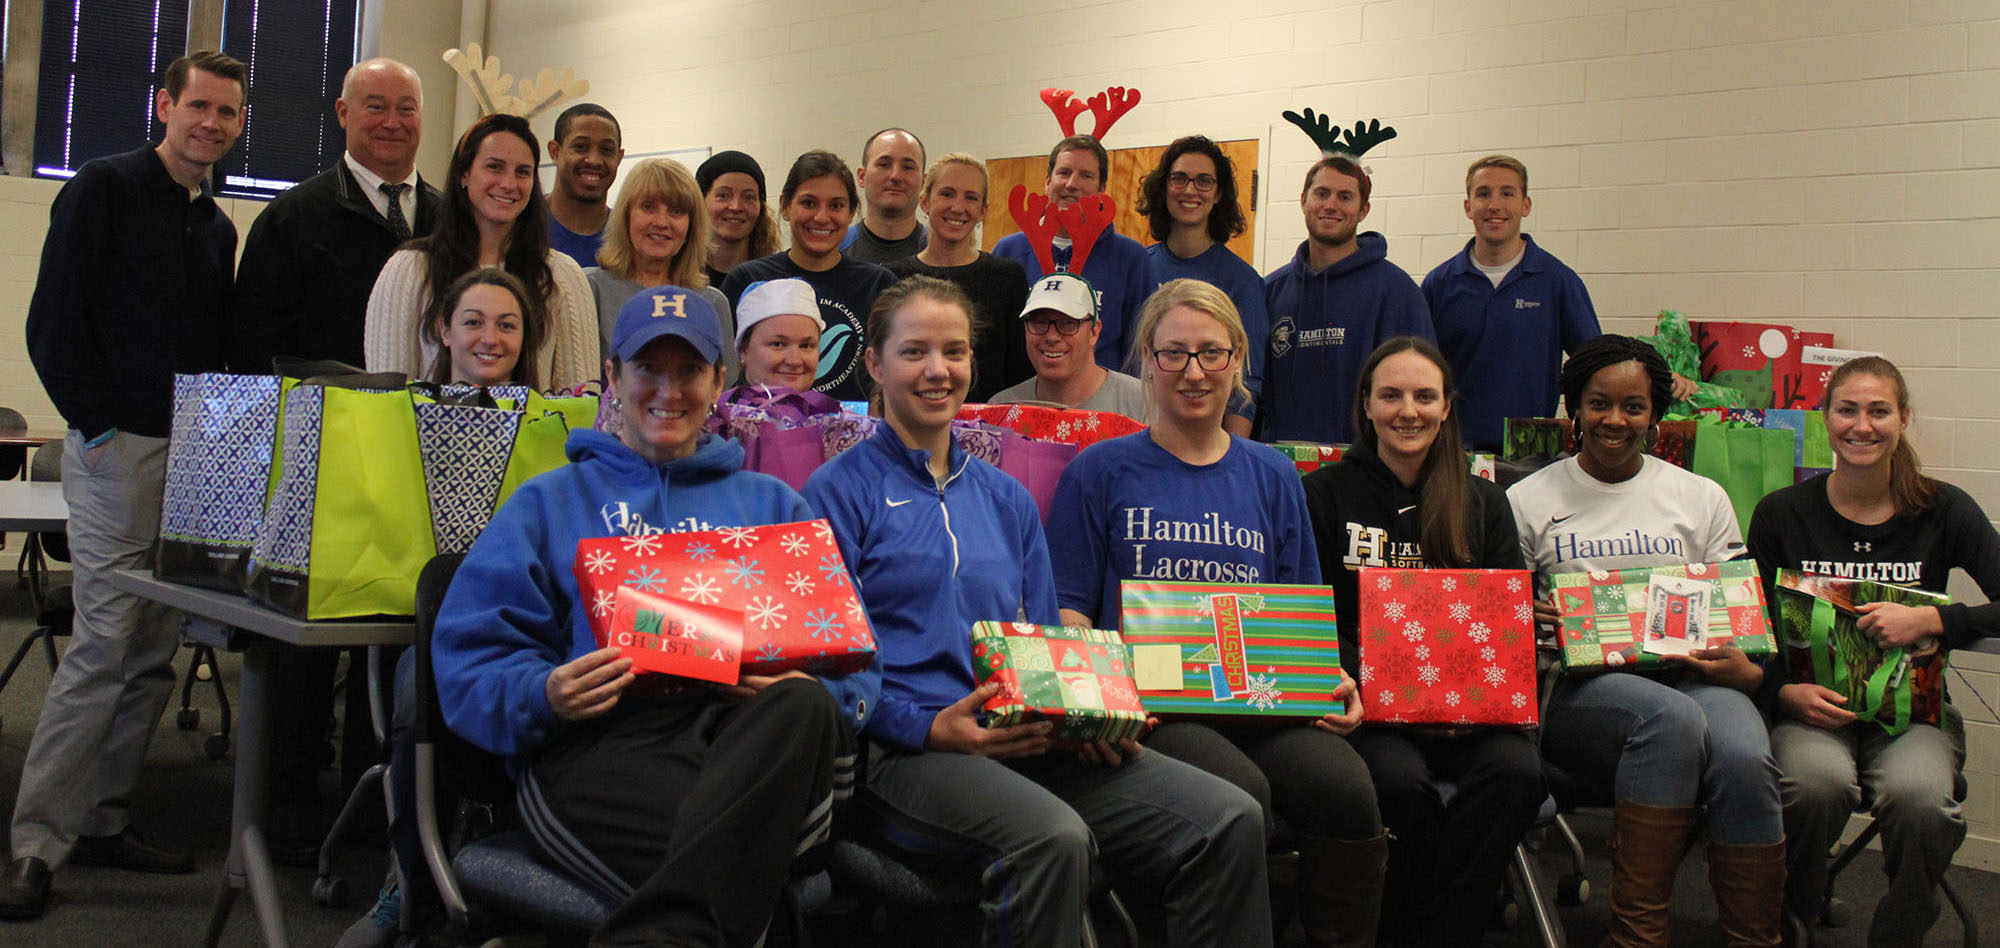 Athletics Department staff and coaches gathered to wrap gifts for the families they adopted through COOP's Holiday Gift Drive.